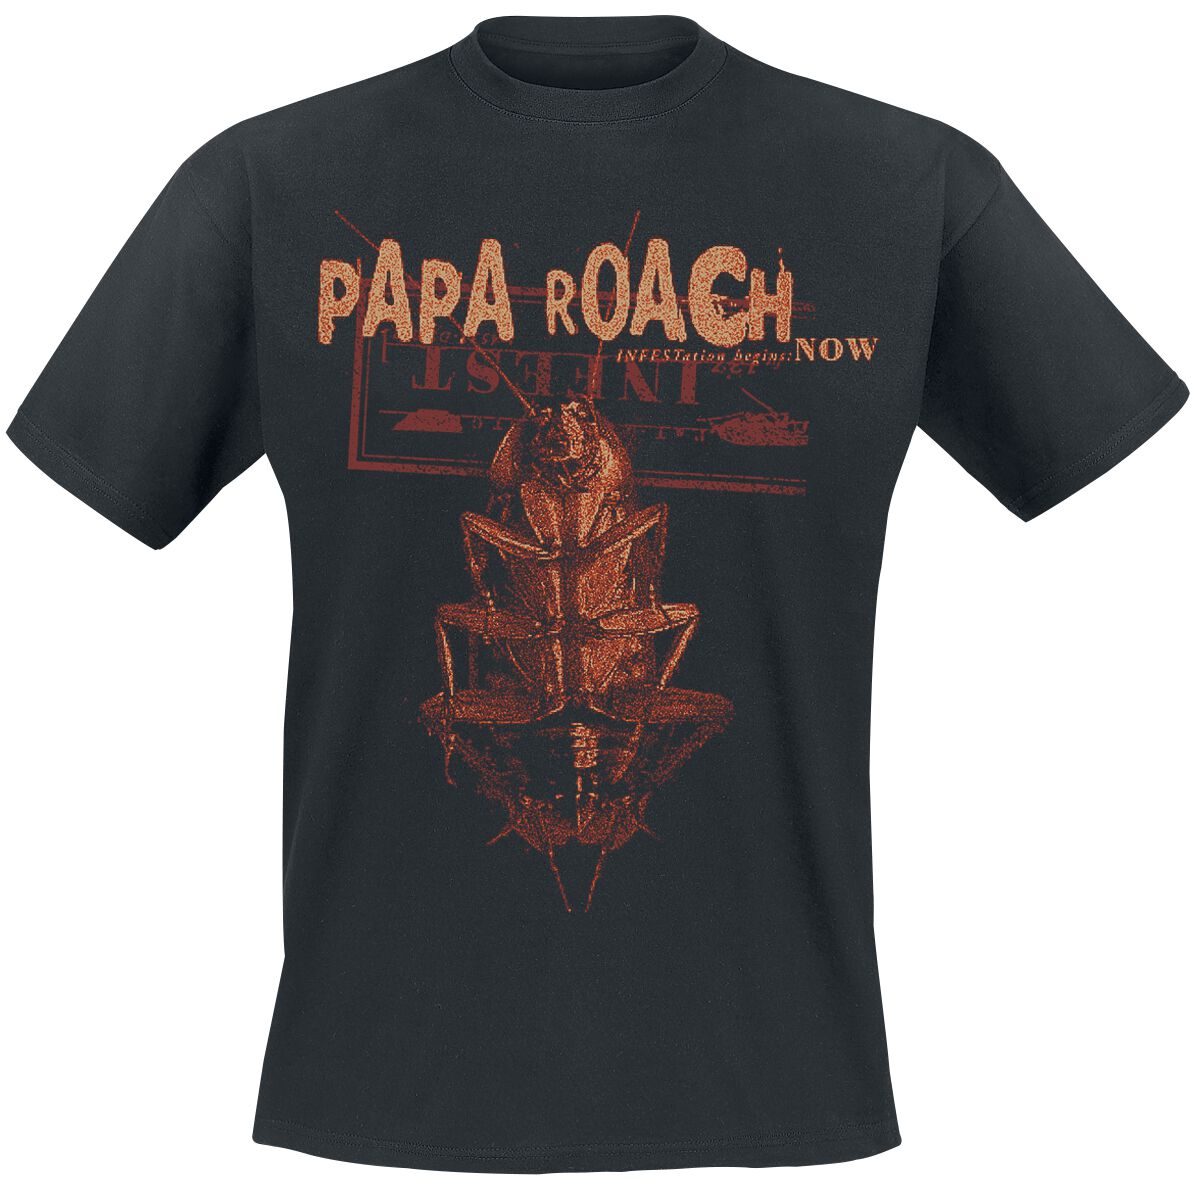 We Are Going To Infest Papa Roach T Shirt Emp